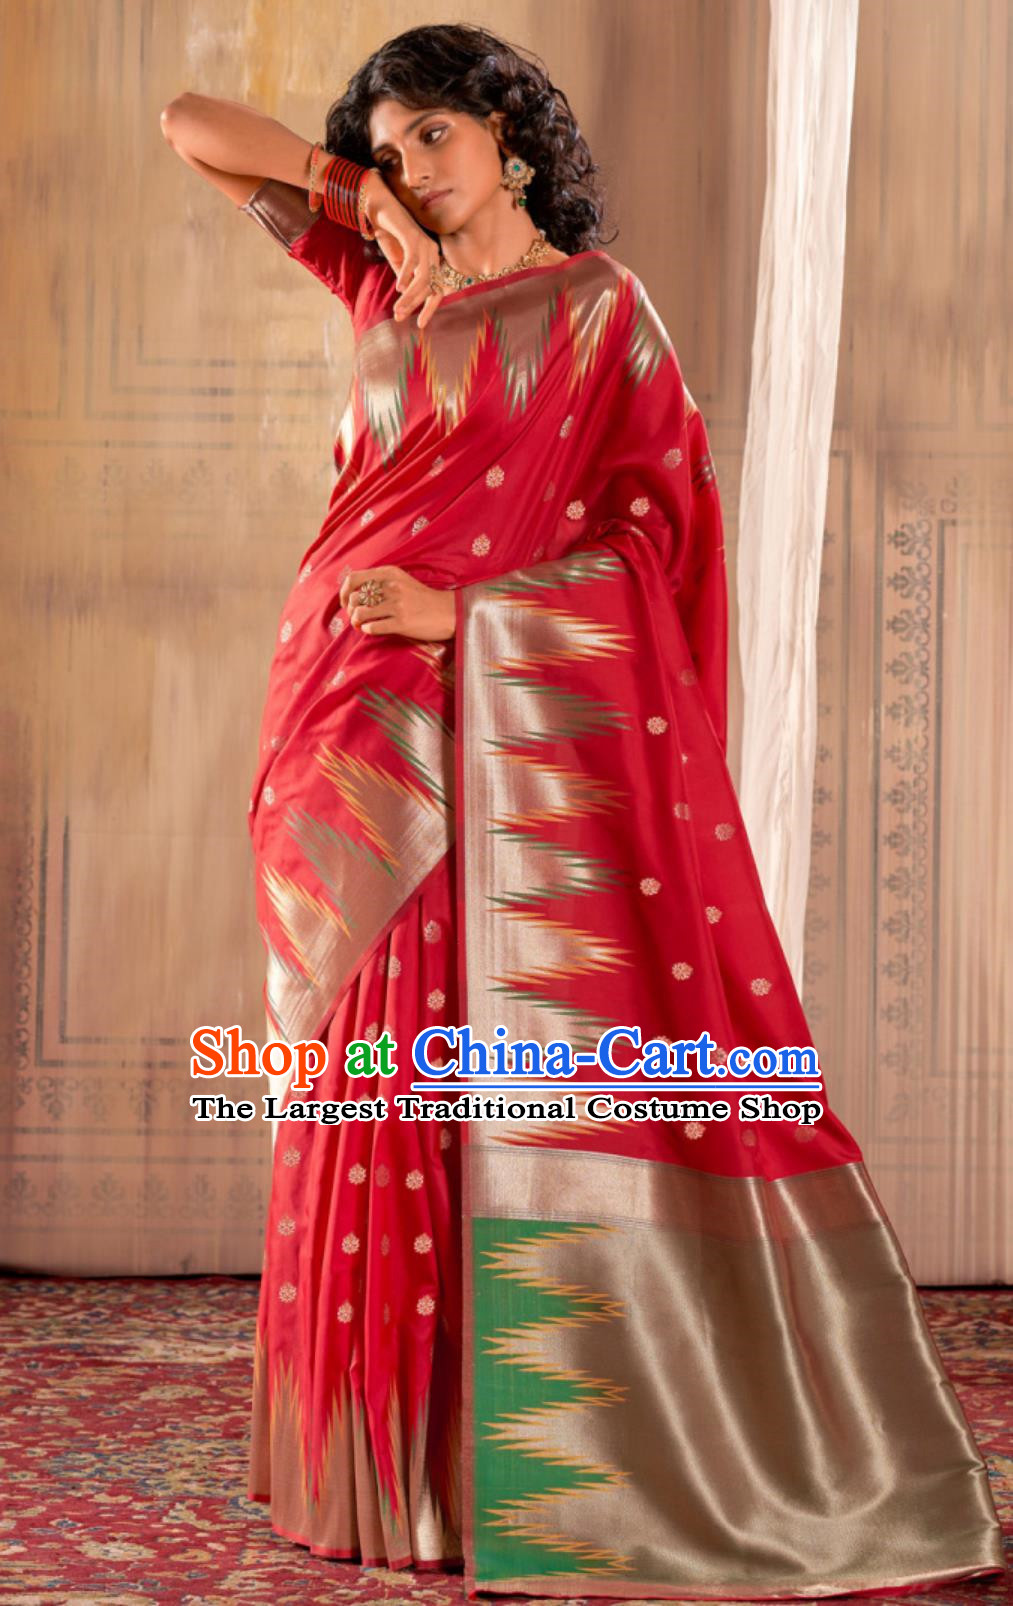 Red Indian Saree Silk Jacquard National Ladies Wrap Skirt Sari Traditional Festival Party Outfit